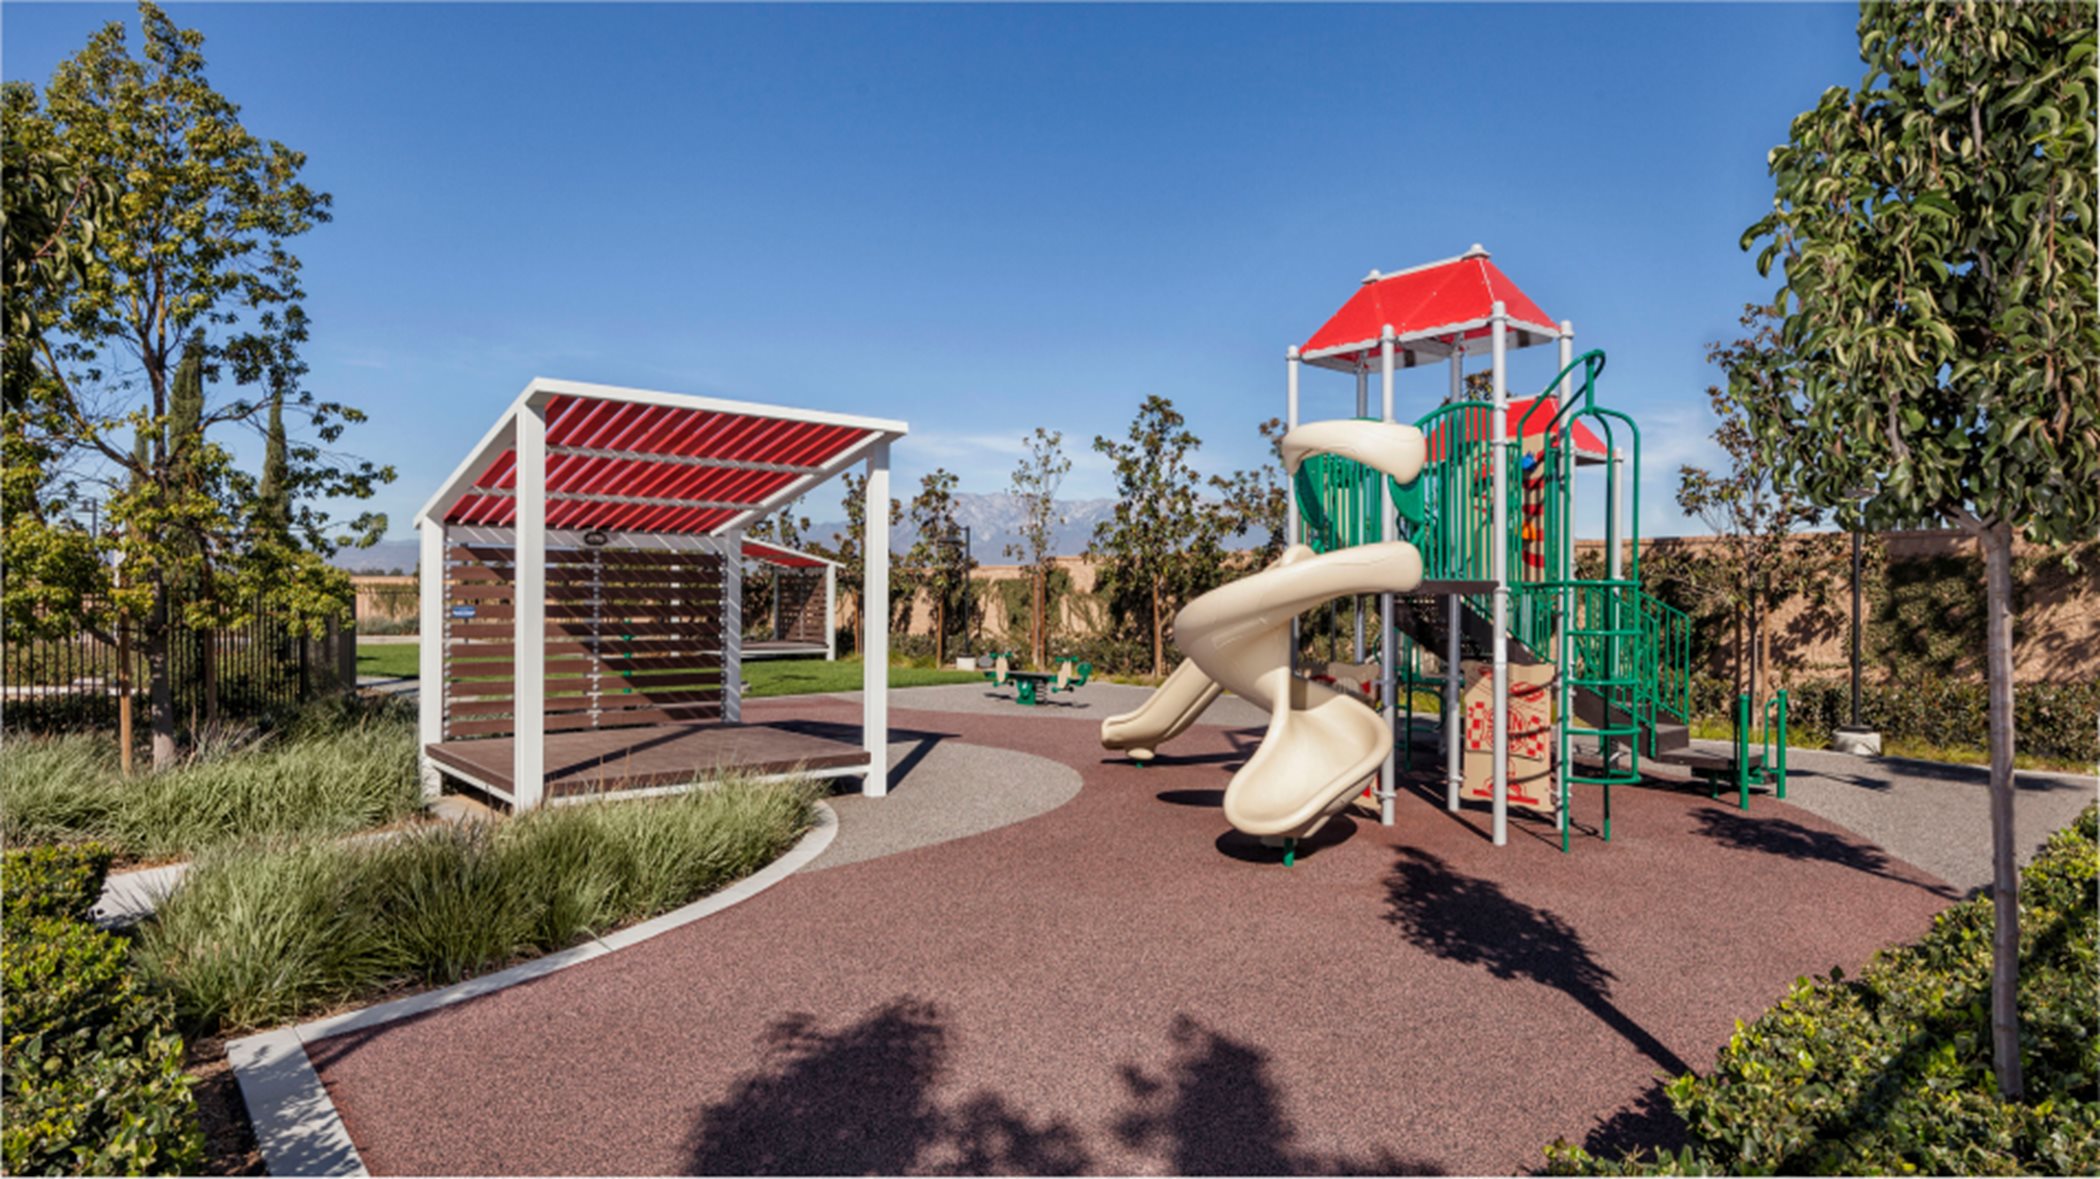 Playground with a shaded area and a playset